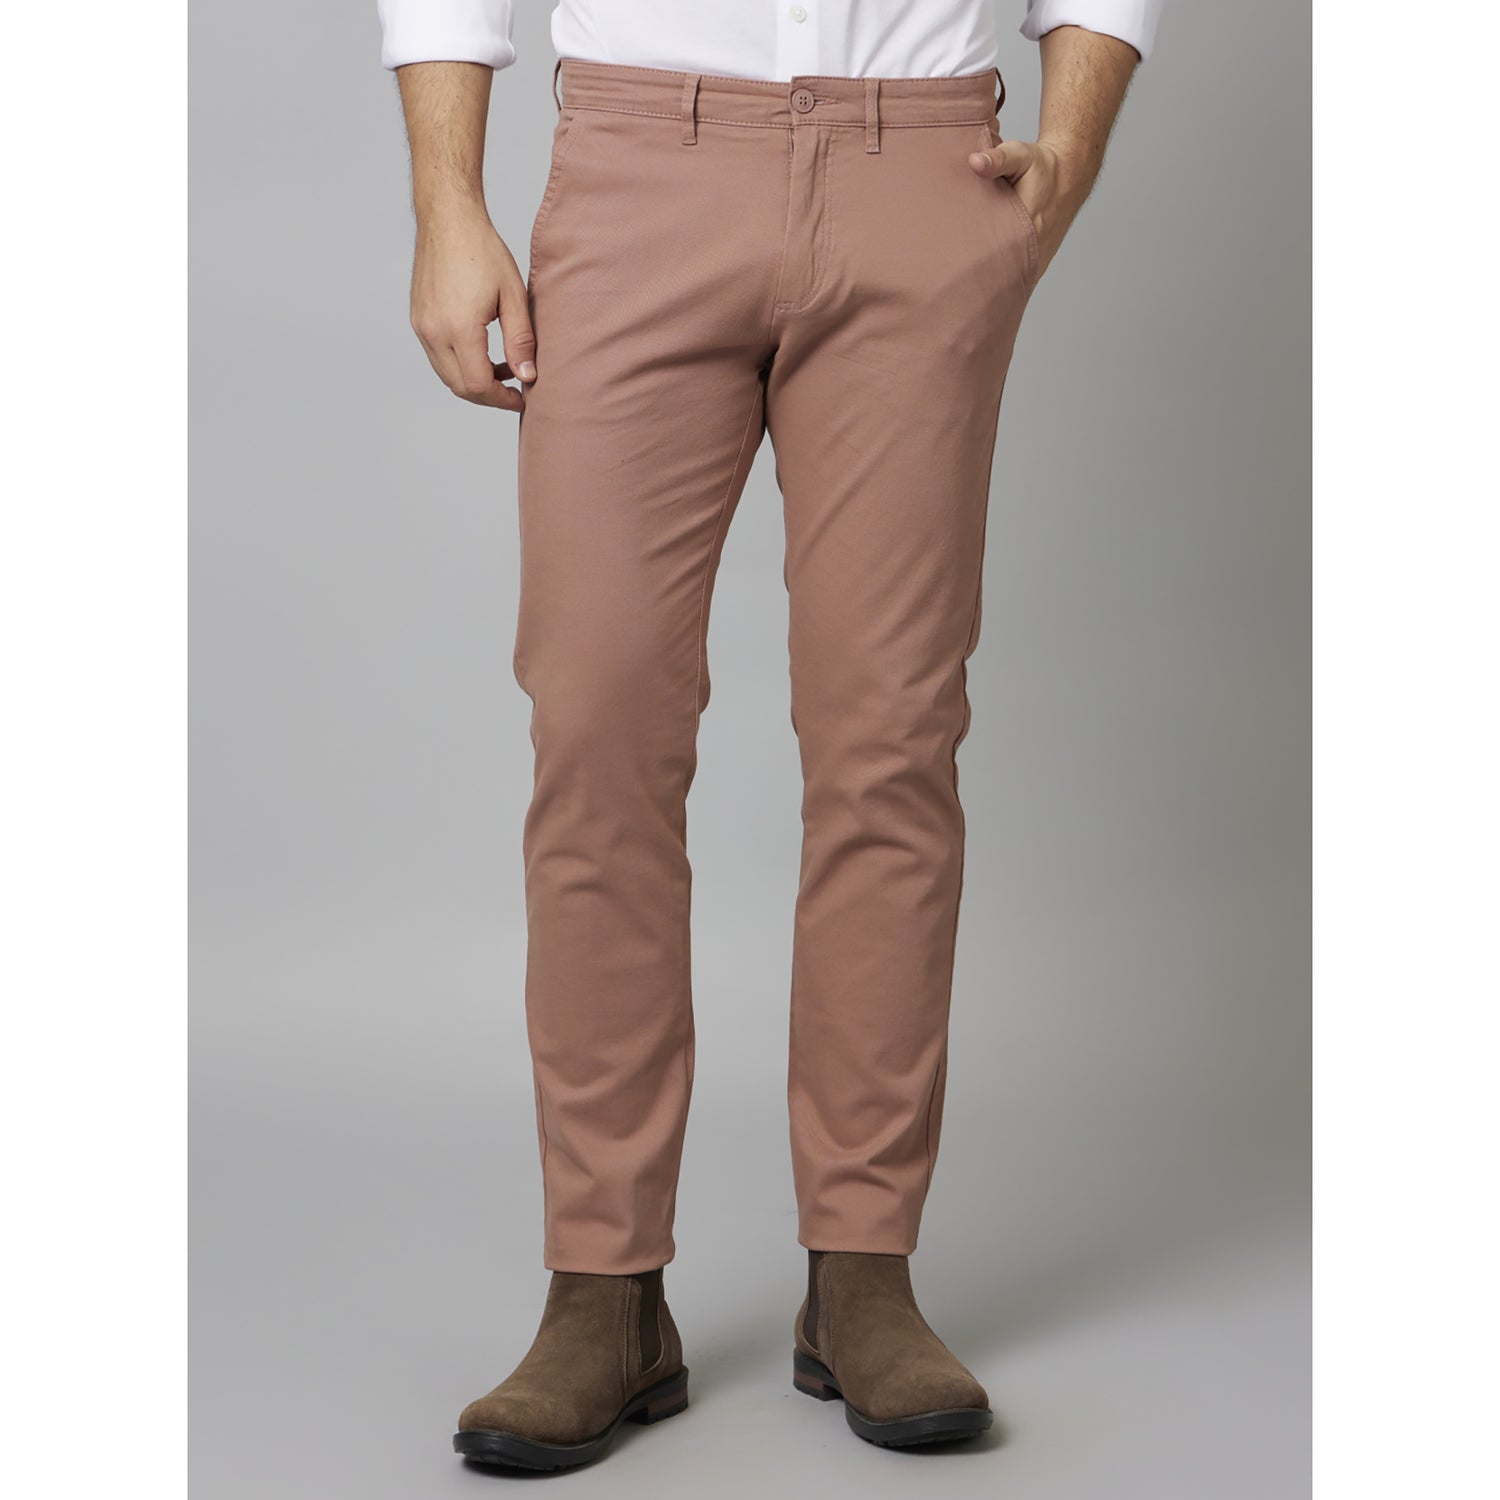 Peach Solid Cotton Blend Trousers (TOCHARLES1)